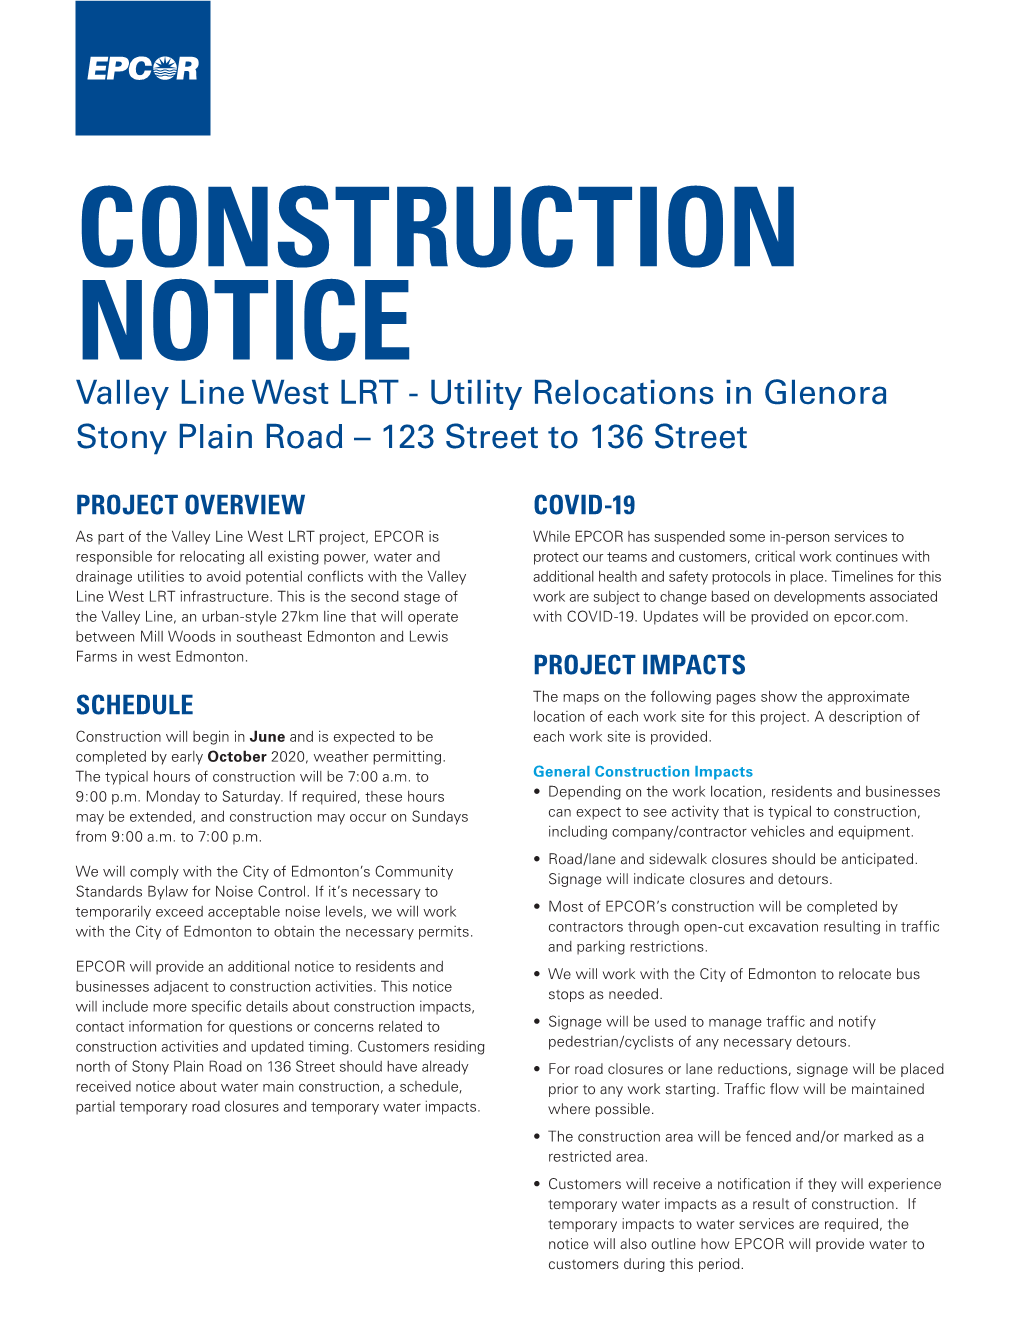 CONSTRUCTION NOTICE Valley Line West LRT - Utility Relocations in Glenora Stony Plain Road – 123 Street to 136 Street